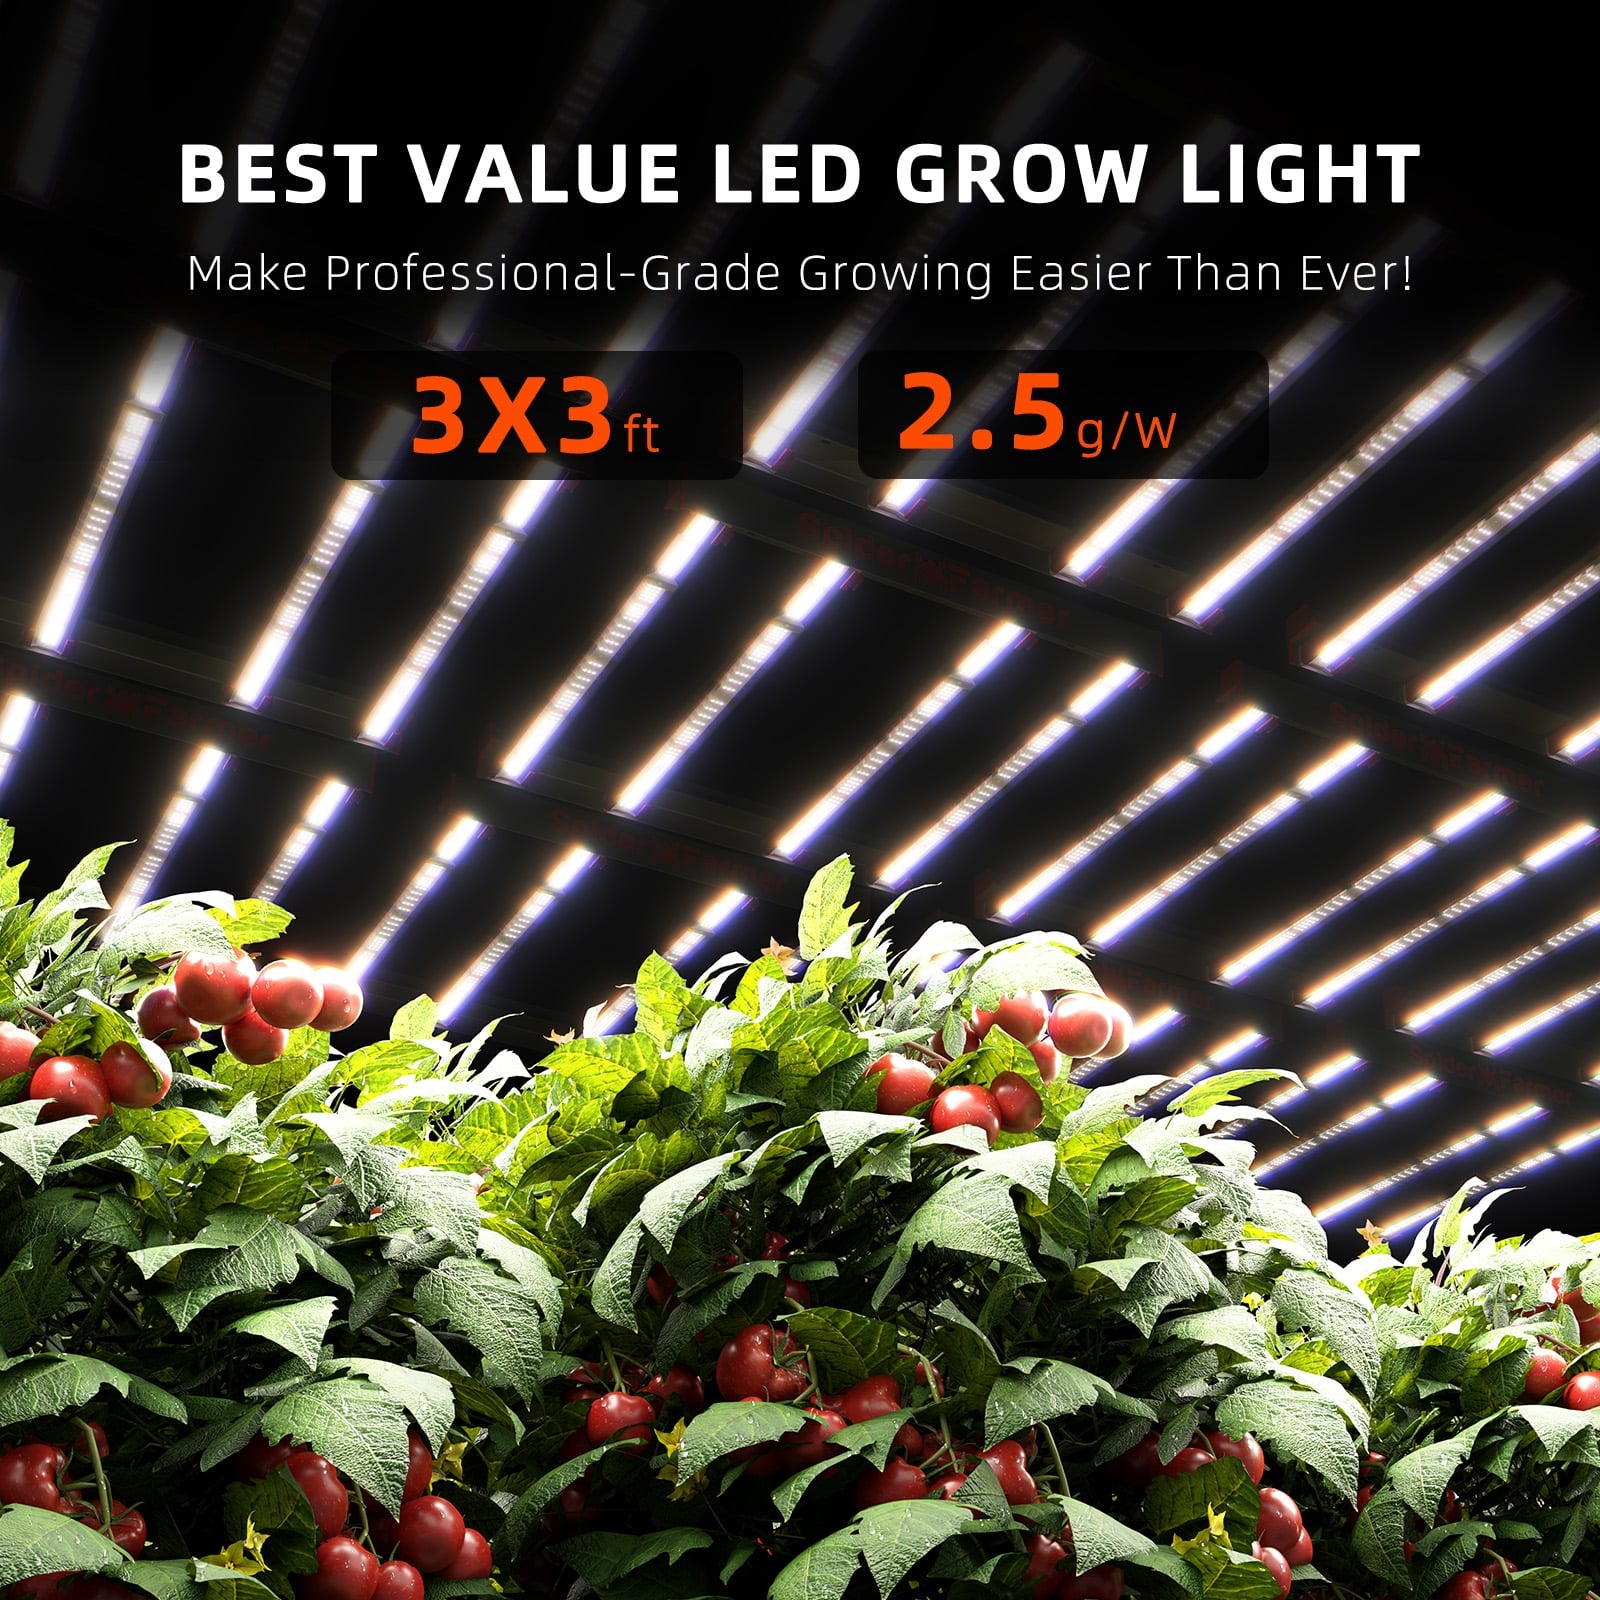 Product Secondary Image:Spider Farmer® G3000 Dimmable Cost-effective Full Spectrum LED Grow Light